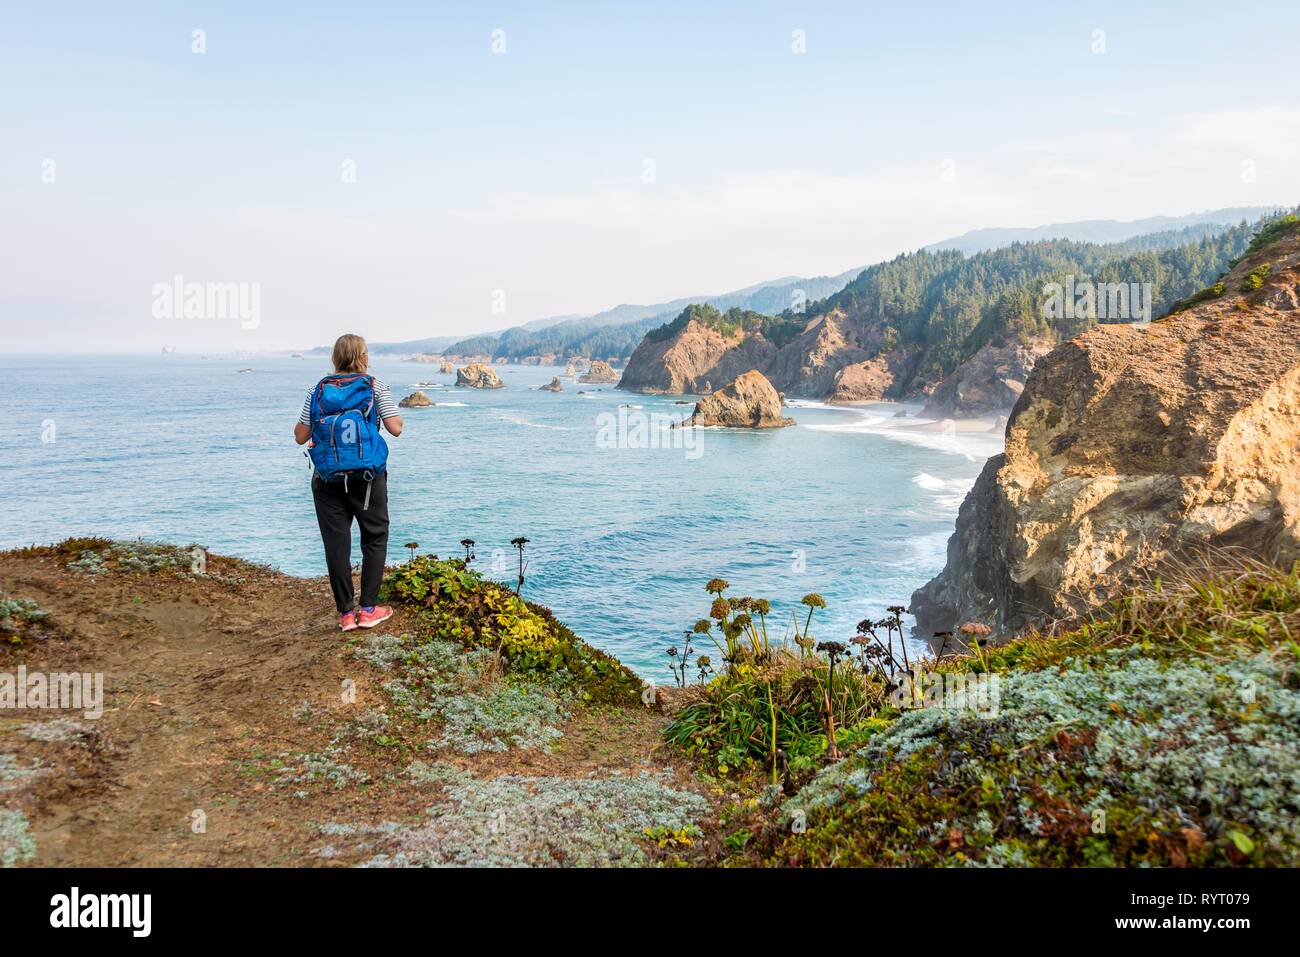 Young woman looking out to sea, rugged rocky coast, Samuel H. Boardman State Scenic Corridor, Indian Sands Trail, Oregon, USA Stock Photo